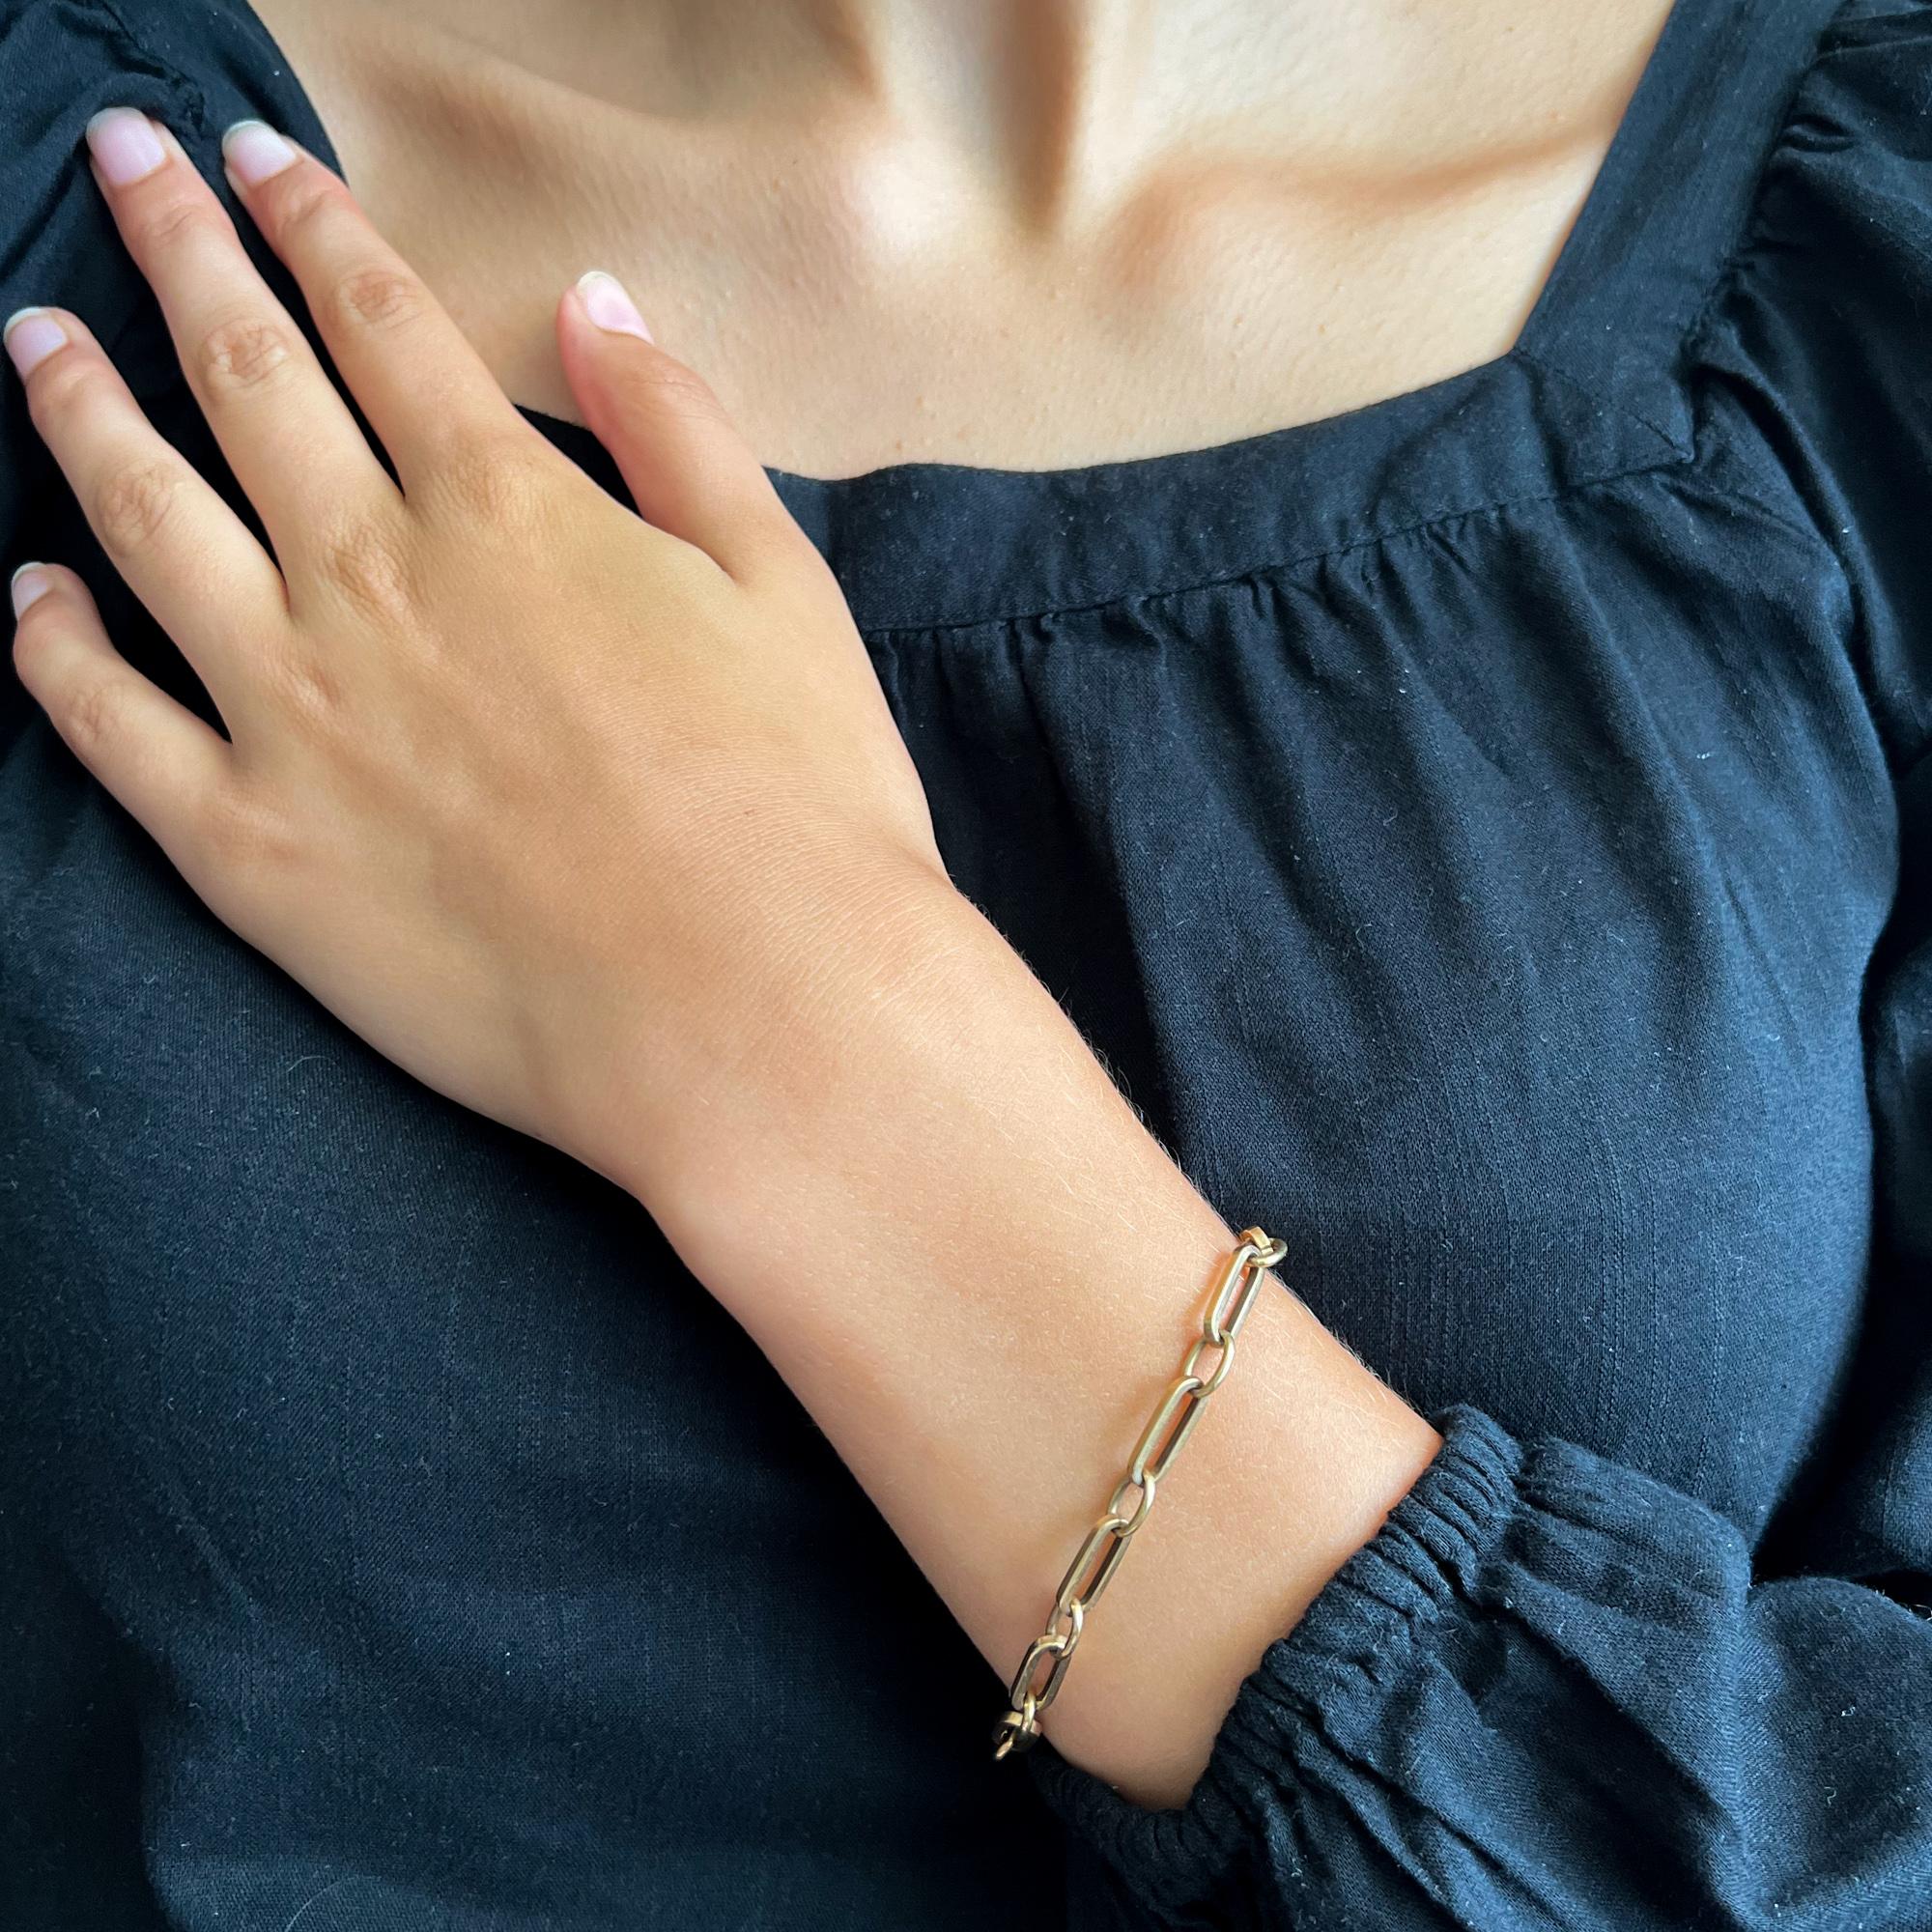 A gorgeous vintage 14 karat gold closed forever bracelet with a typical closed forever clasp. The bracelet is suitable as a charms bracelet, on which charms with a sentimental value or beautiful memory can be worn. The bracelet is a timeless